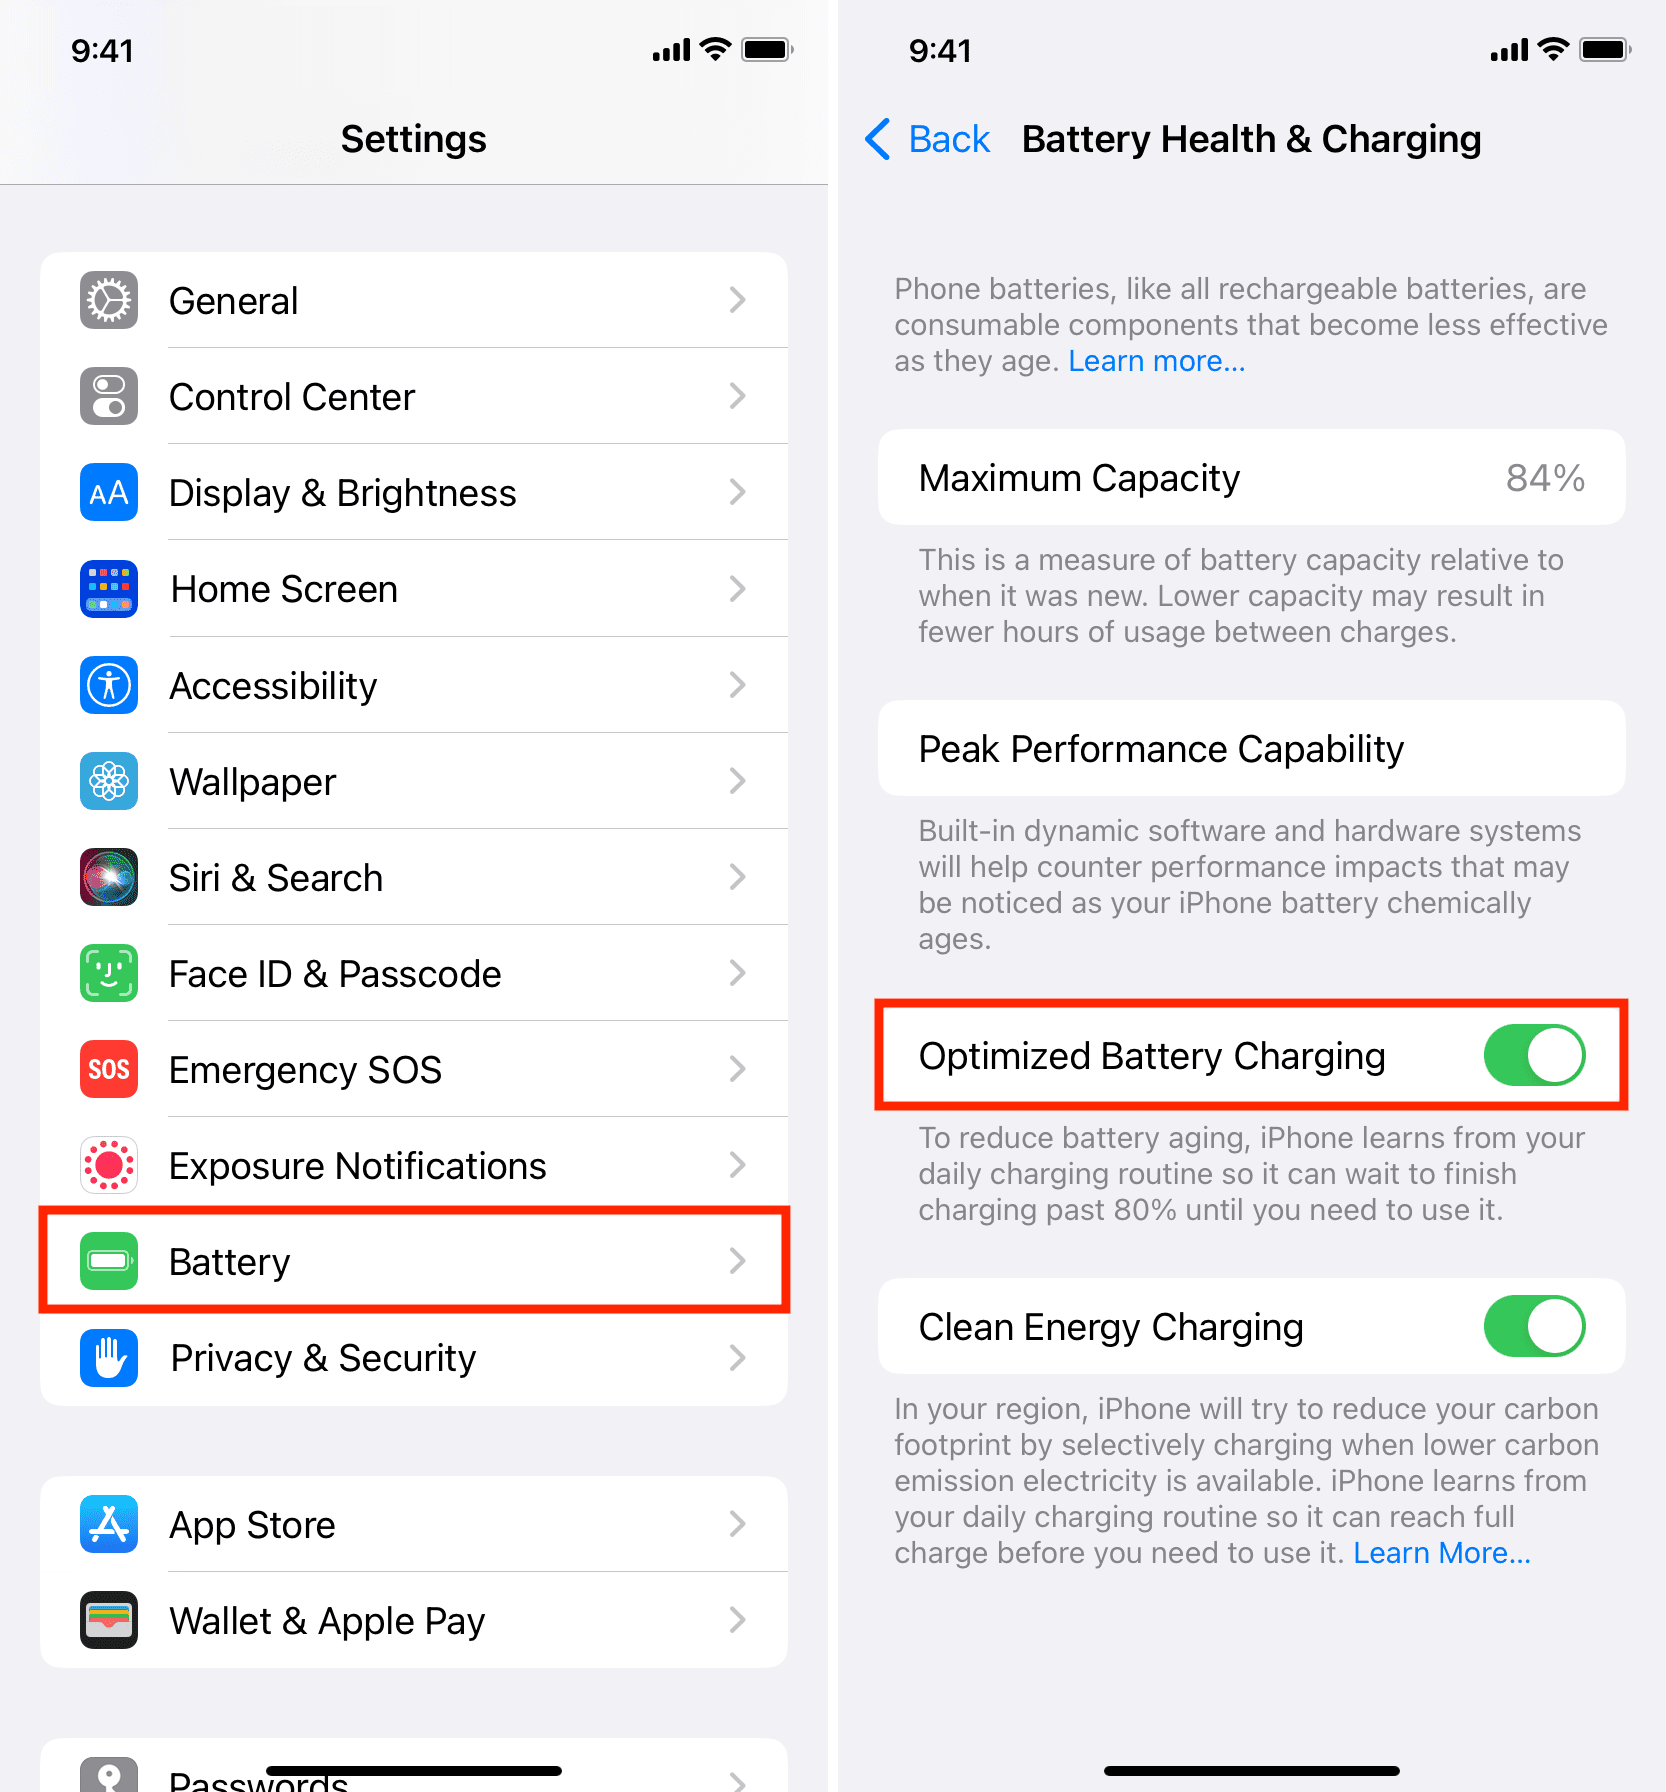 Optimized Battery Charging enabled on iPhone